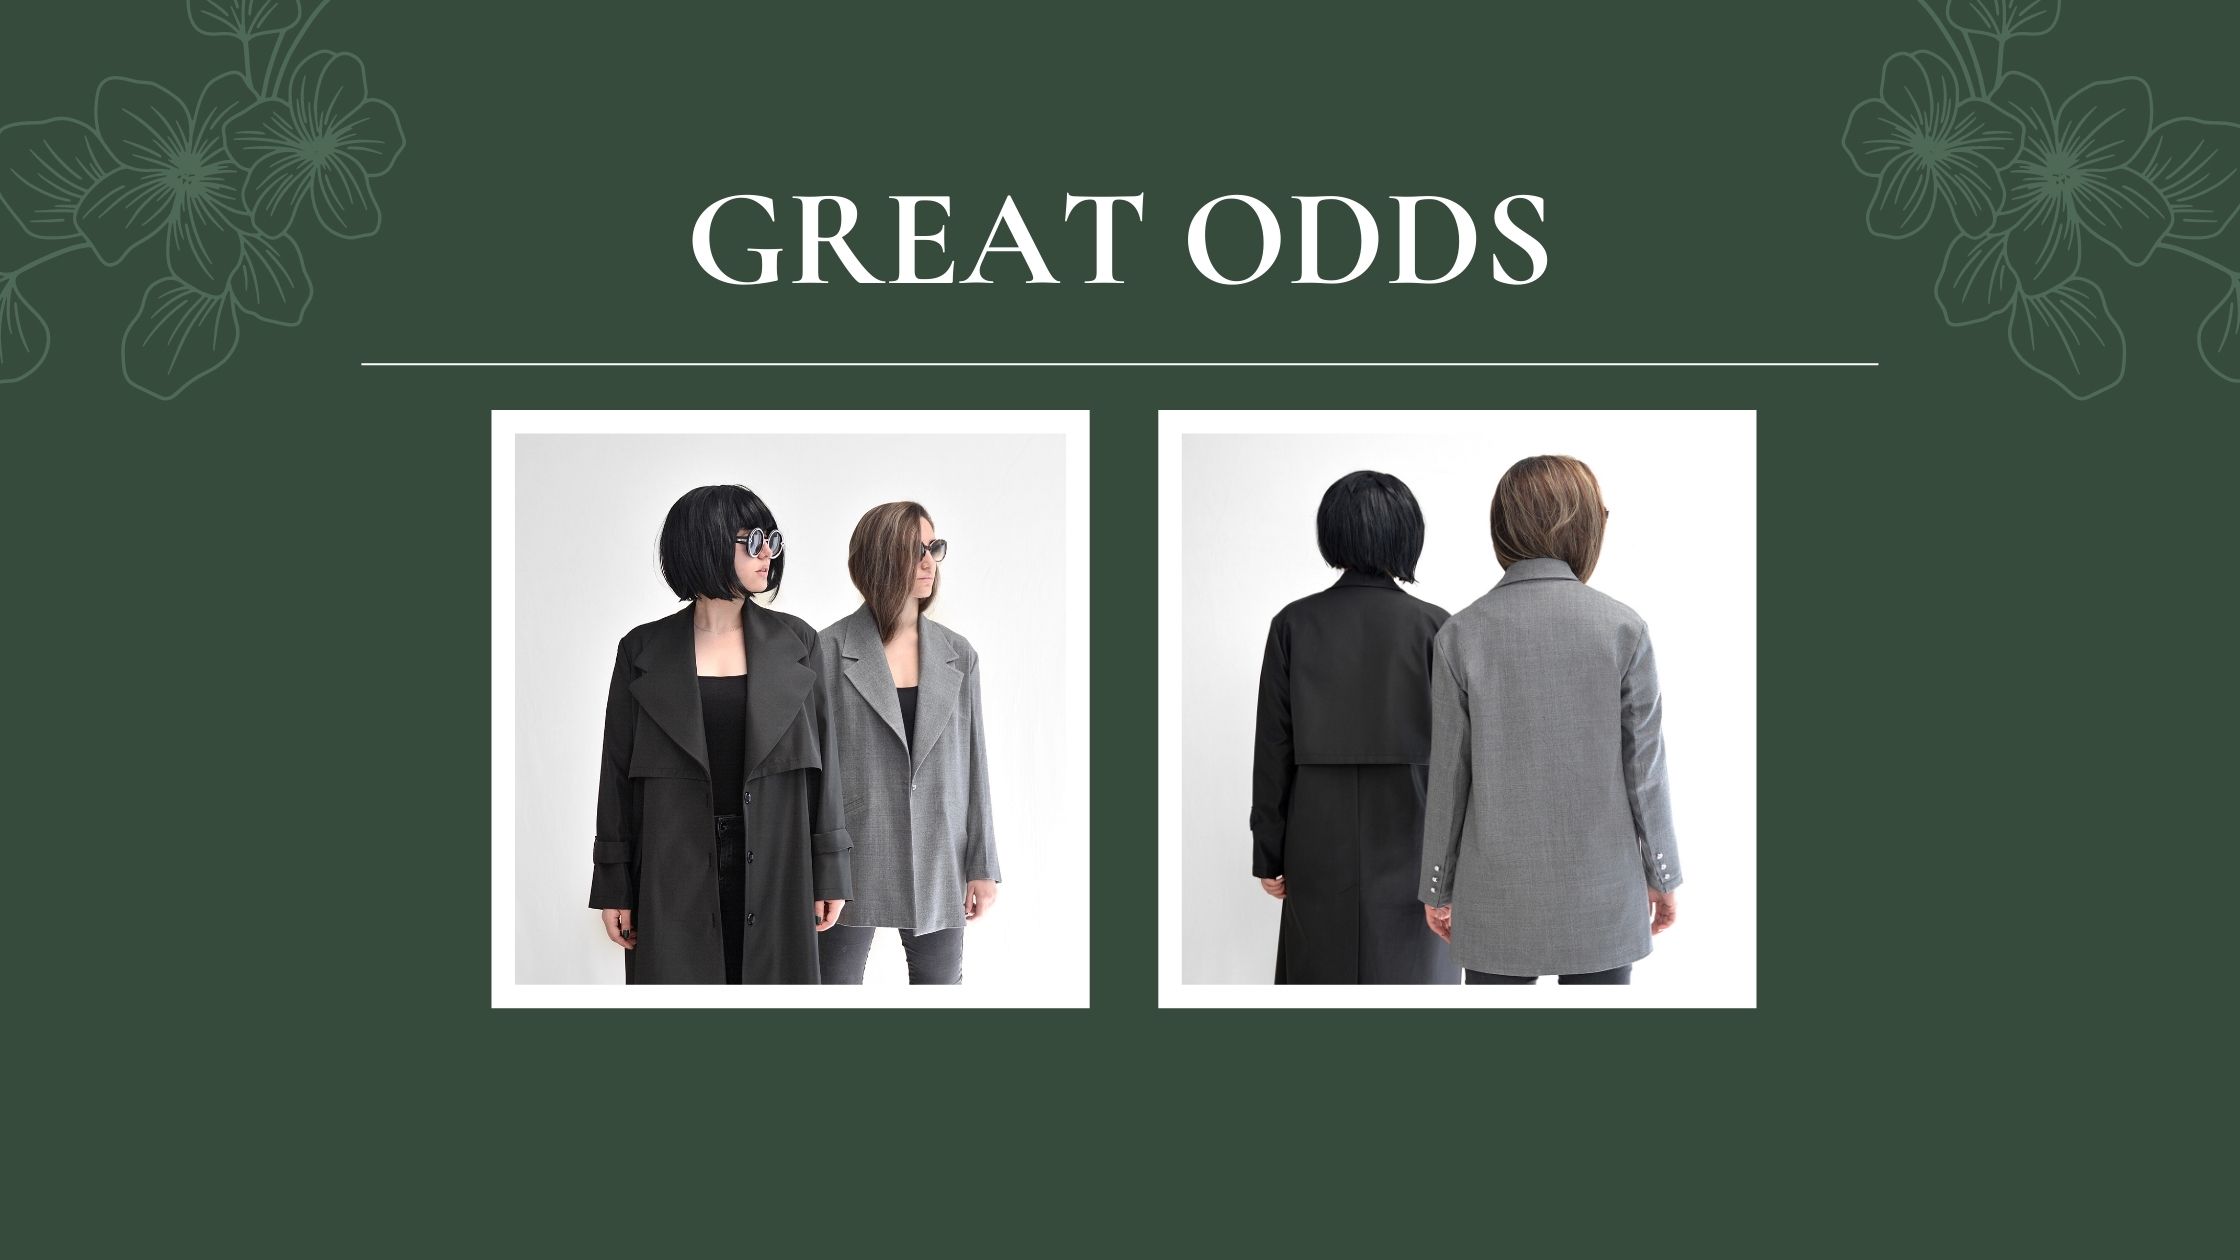 Great odds